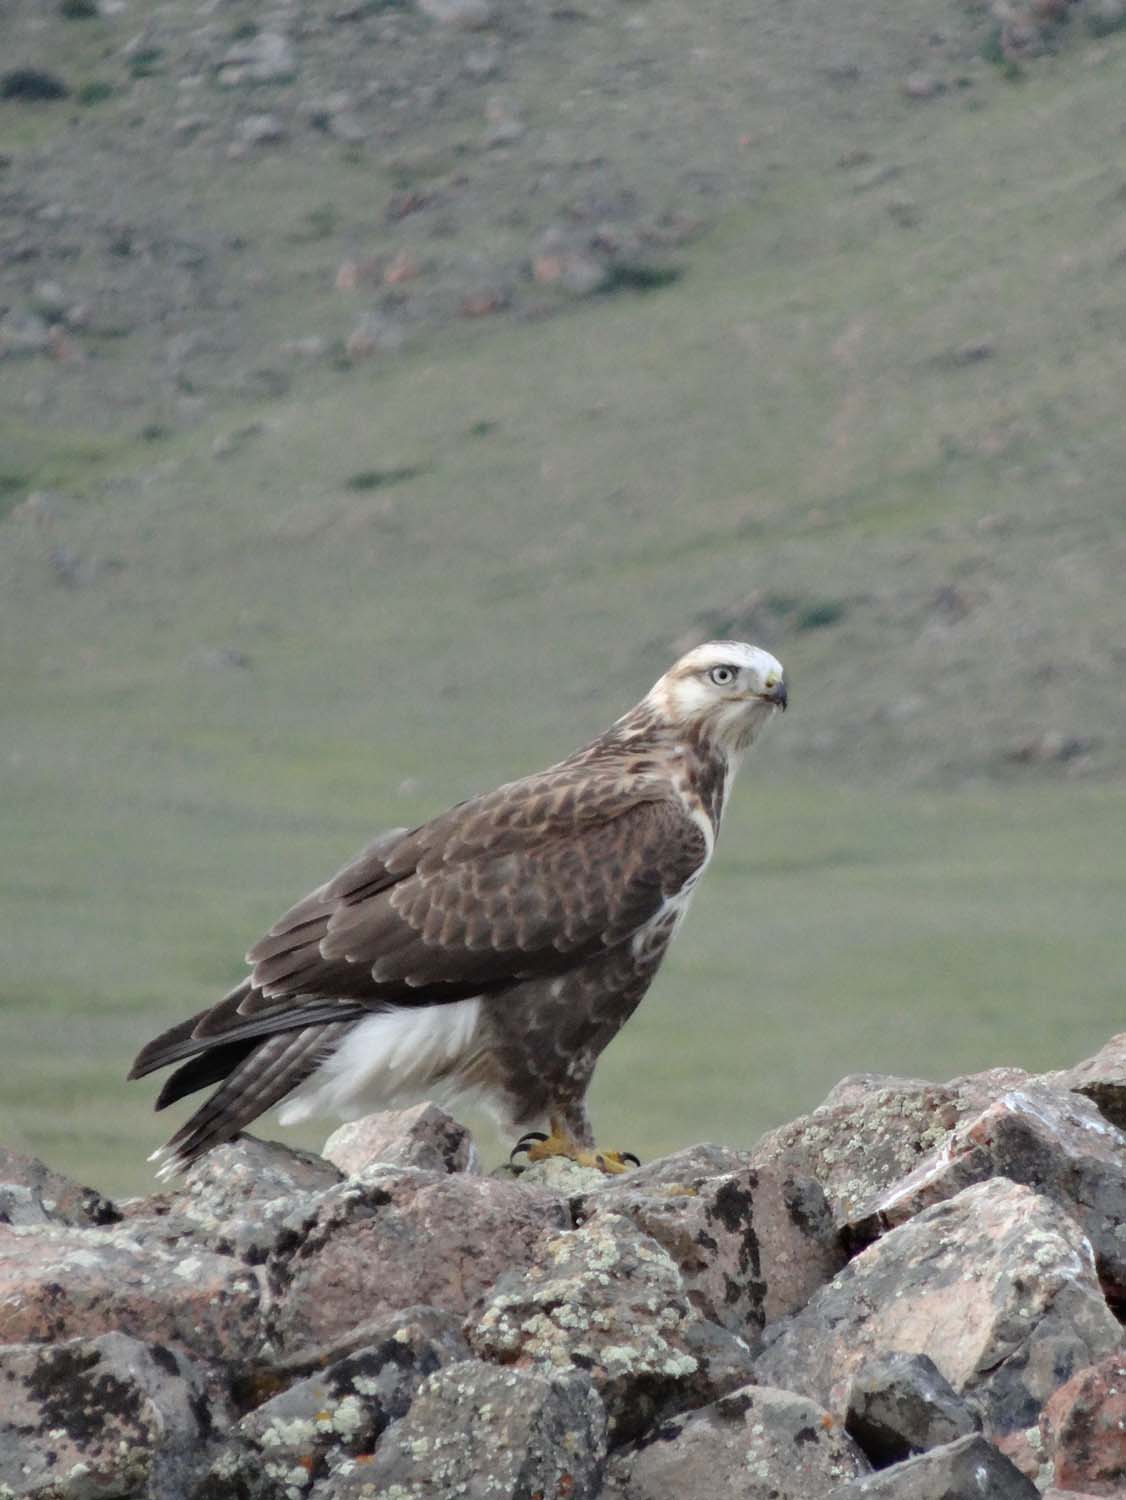 eagles, always looking for marmots or ground squirrels